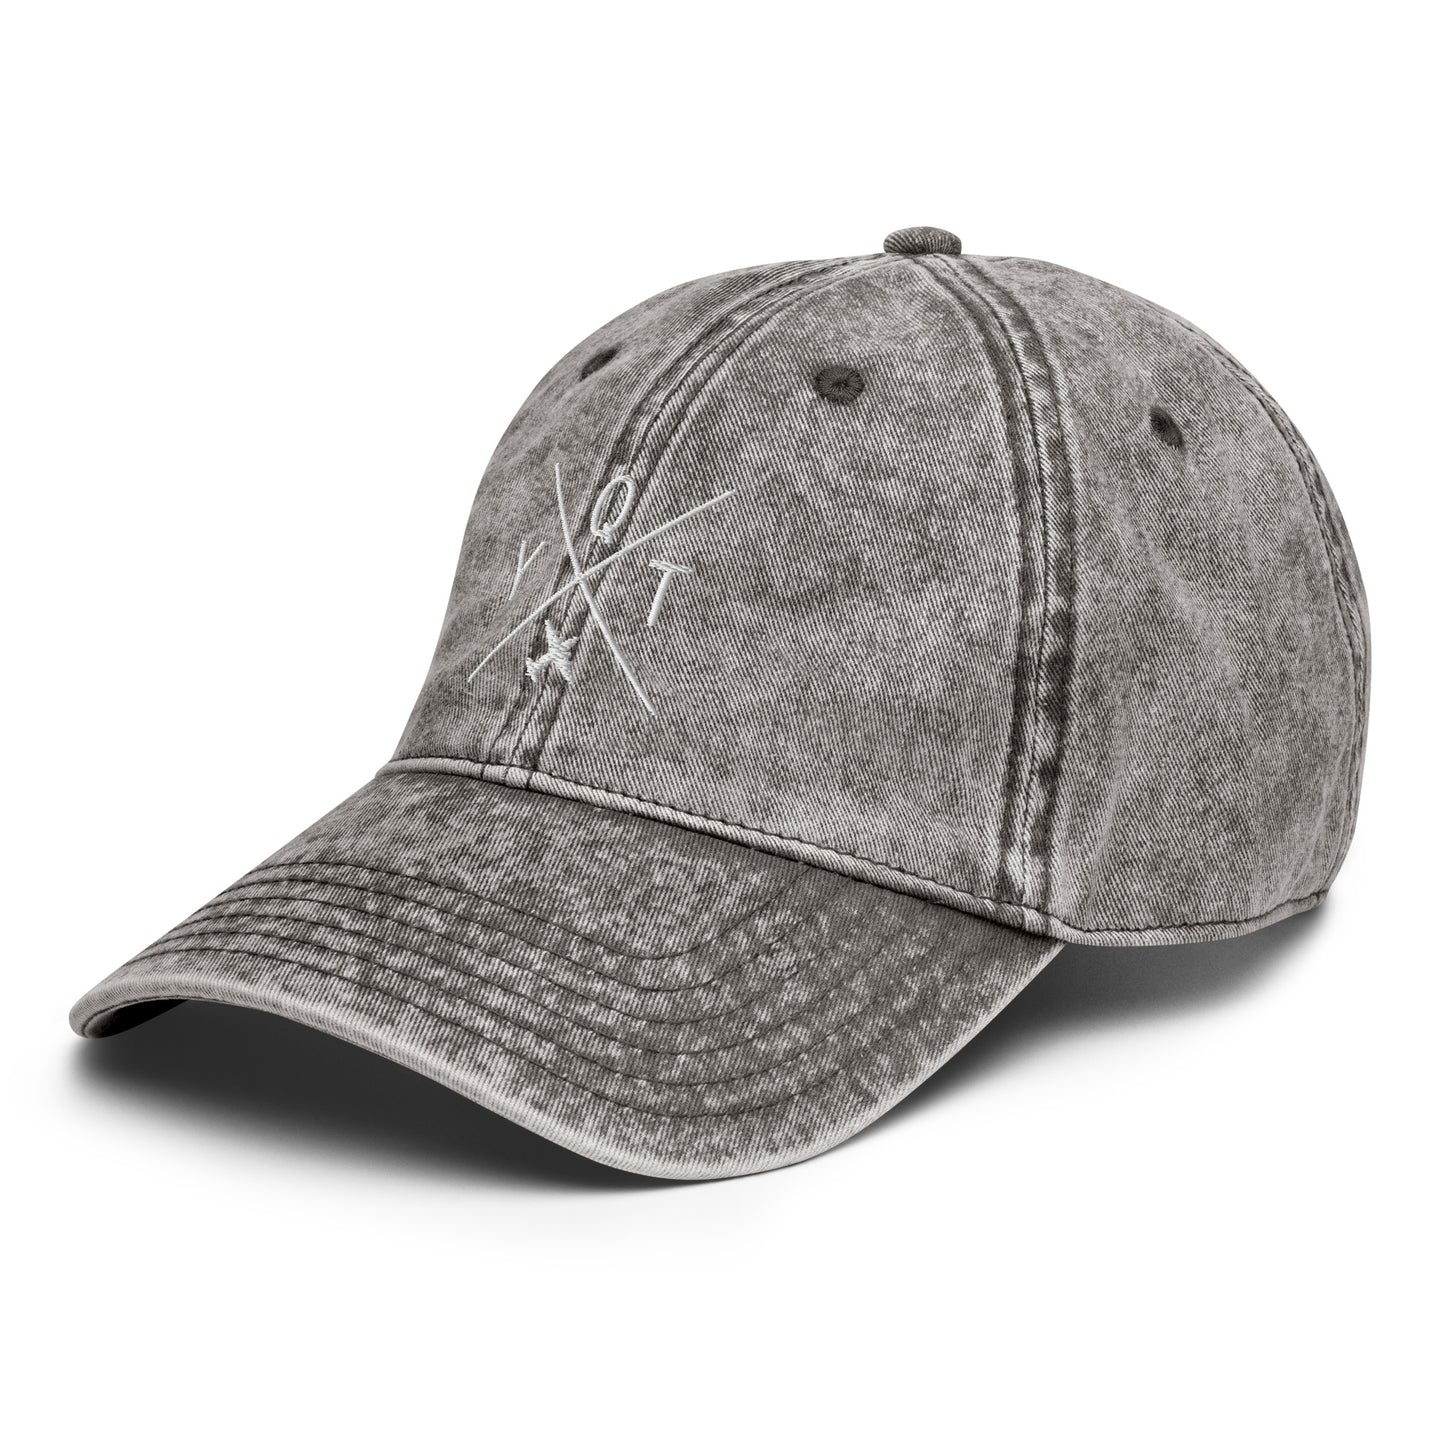 Crossed-X Cotton Twill Cap - White • YQT Thunder Bay • YHM Designs - Image 31